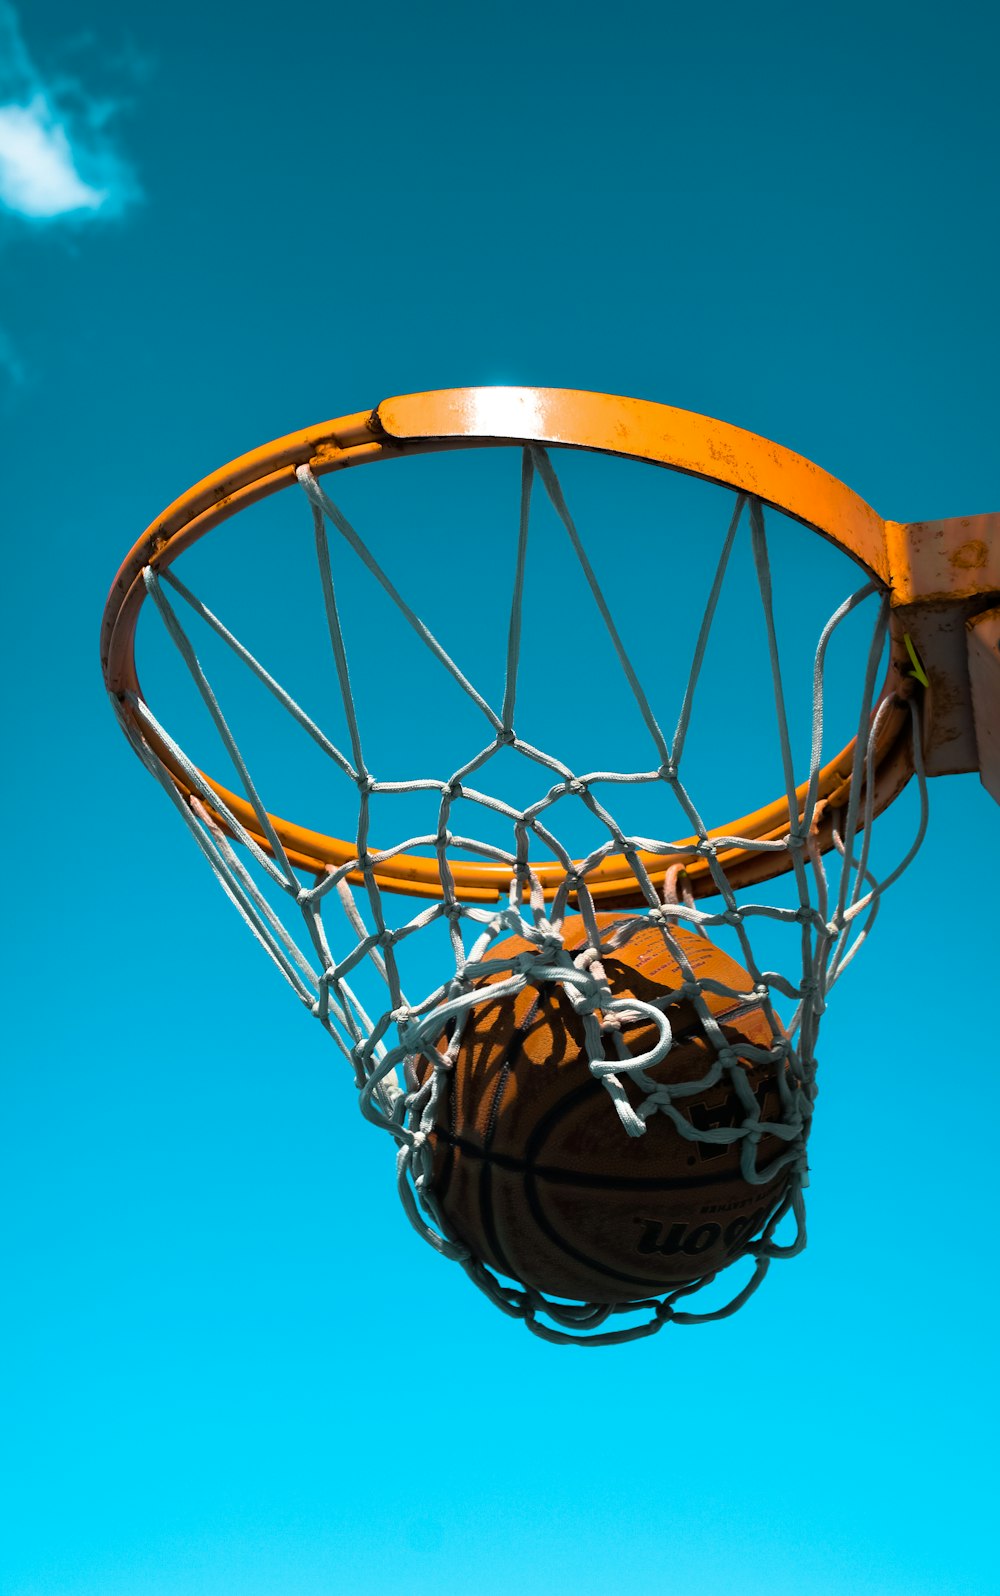 500+ Basketball Hoop Pictures [HD] | Download Free Images on Unsplash